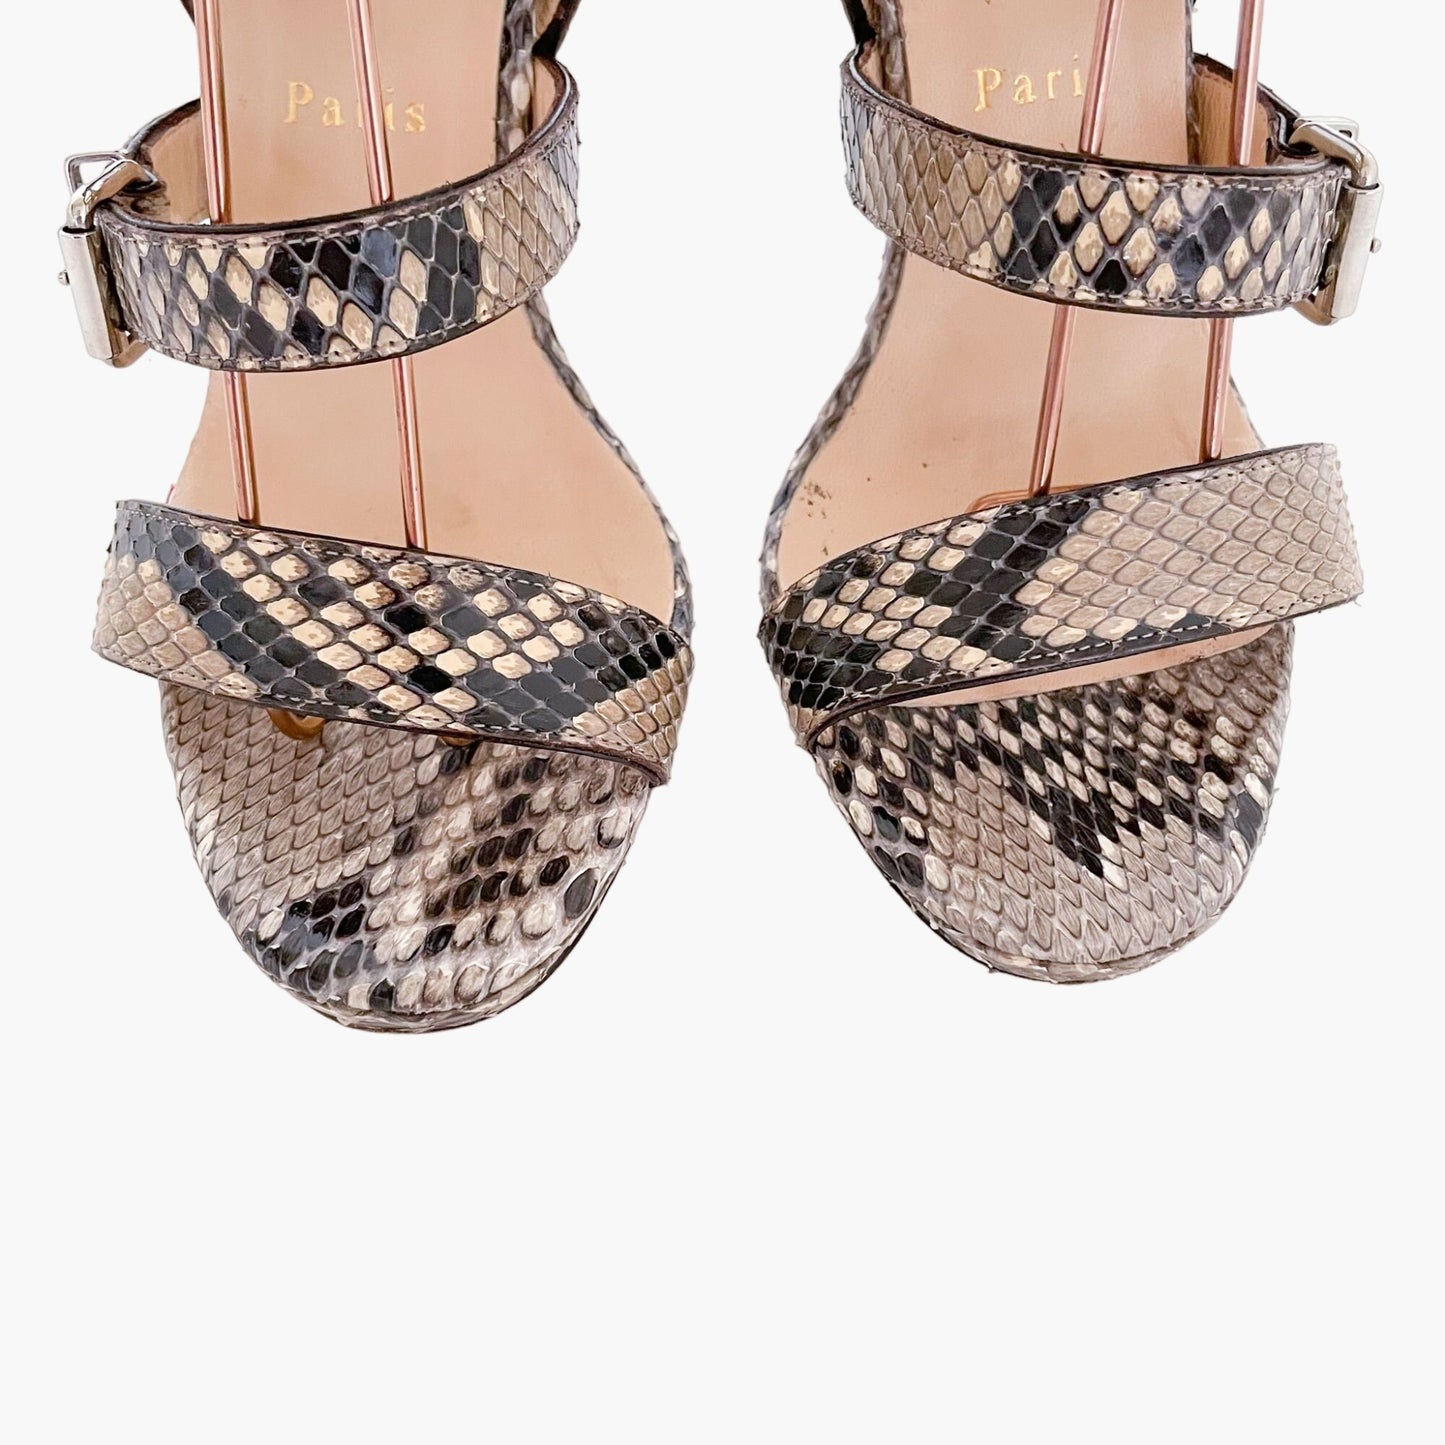 Christian Louboutin Funky 120 Sandals in Snake Print Size 37.5